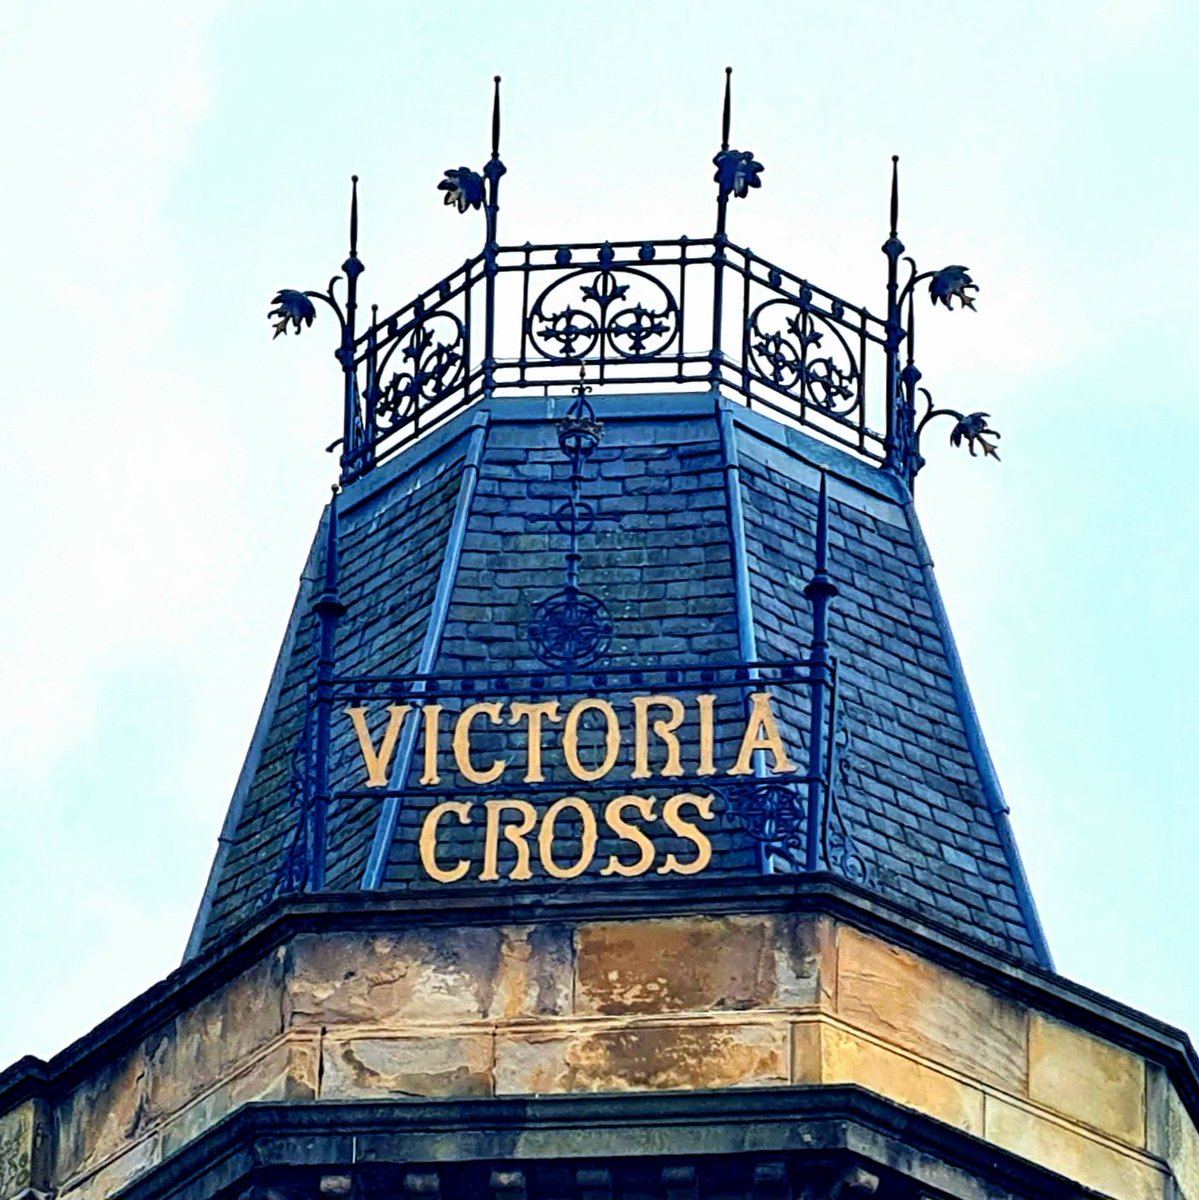 Love this bit of metalwork at the top of a building at Victoria Cross on the southside of Glasgow. I particularly like the font used for the lettering. 

Cont./

#glasgow #victoriacross #victoriaroad #architecture #glasgowarchitecture #glasgowbuildings #metalwork #brattishing